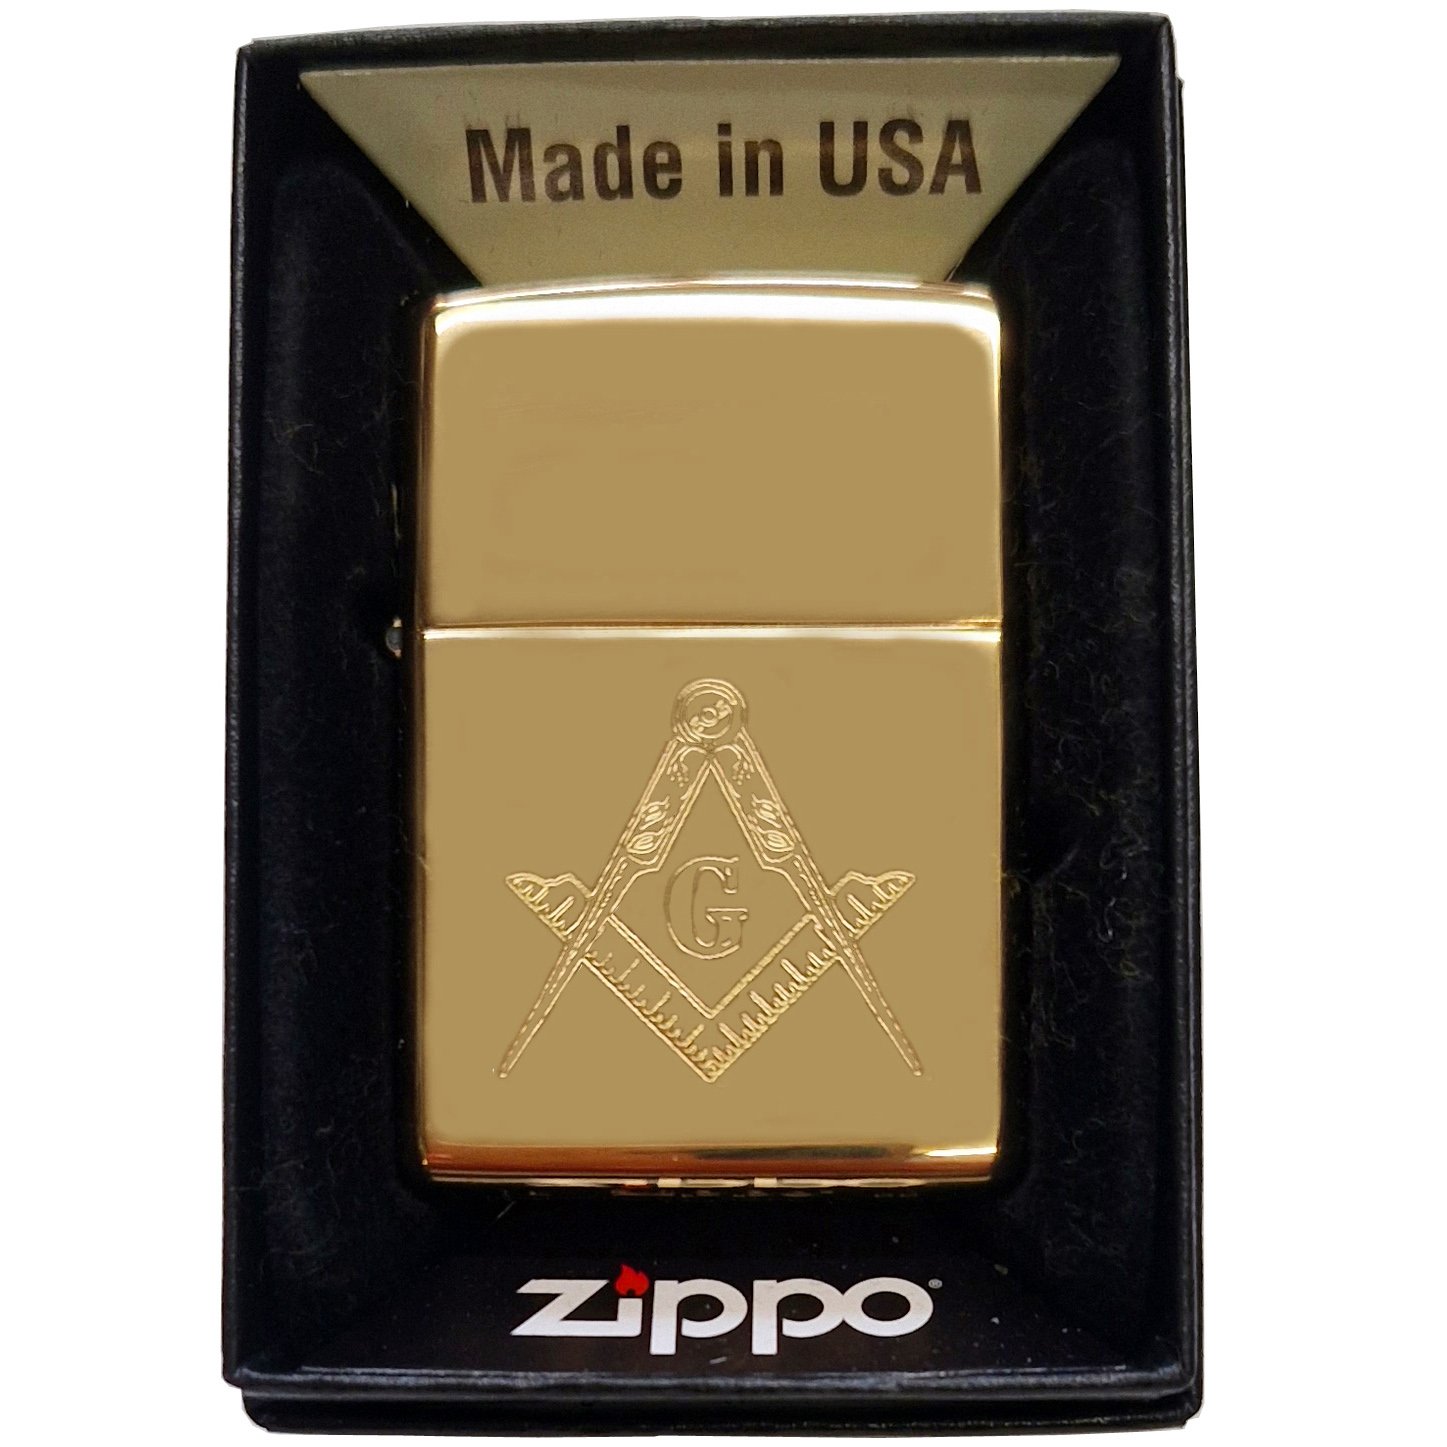 Genuine Zippo Wick For Zippo & Other Petrol Lighters (Pack